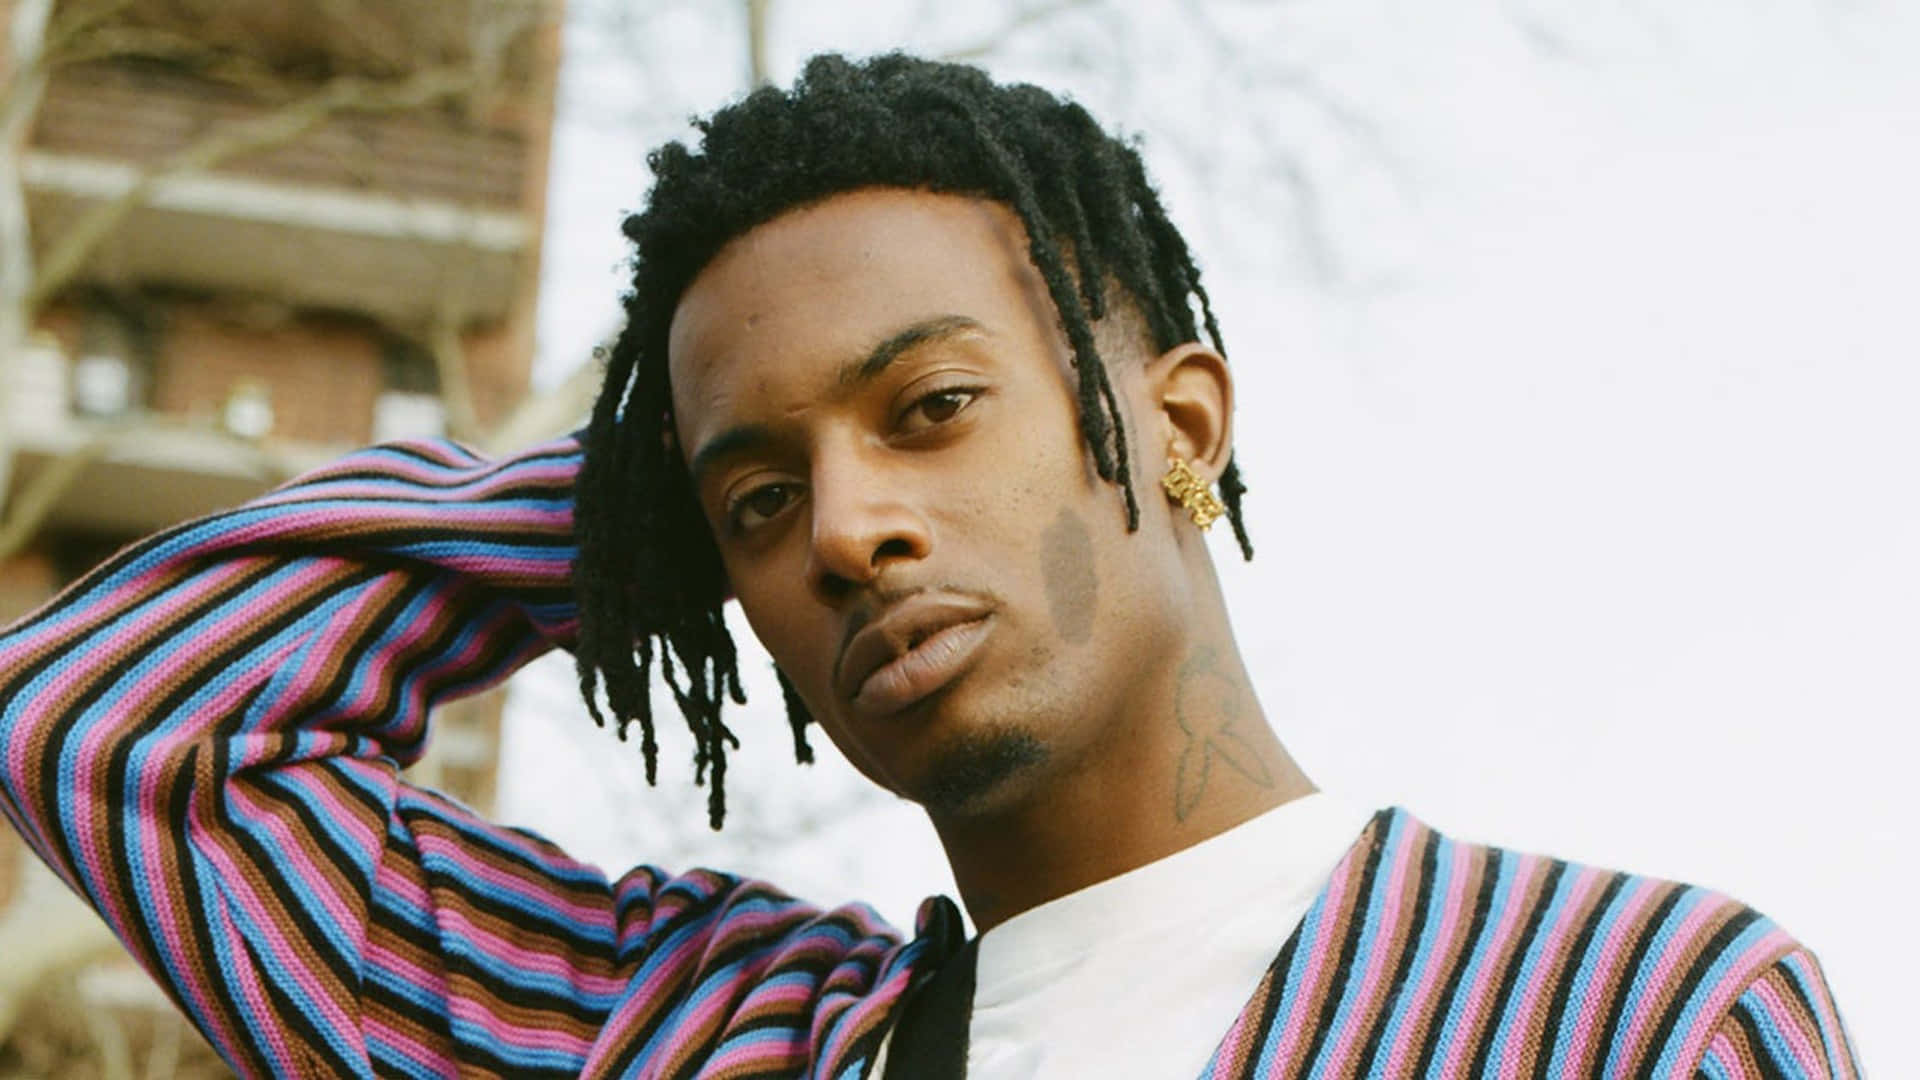 Playboi Carti shows off his signature style in this bright HD image Wallpaper